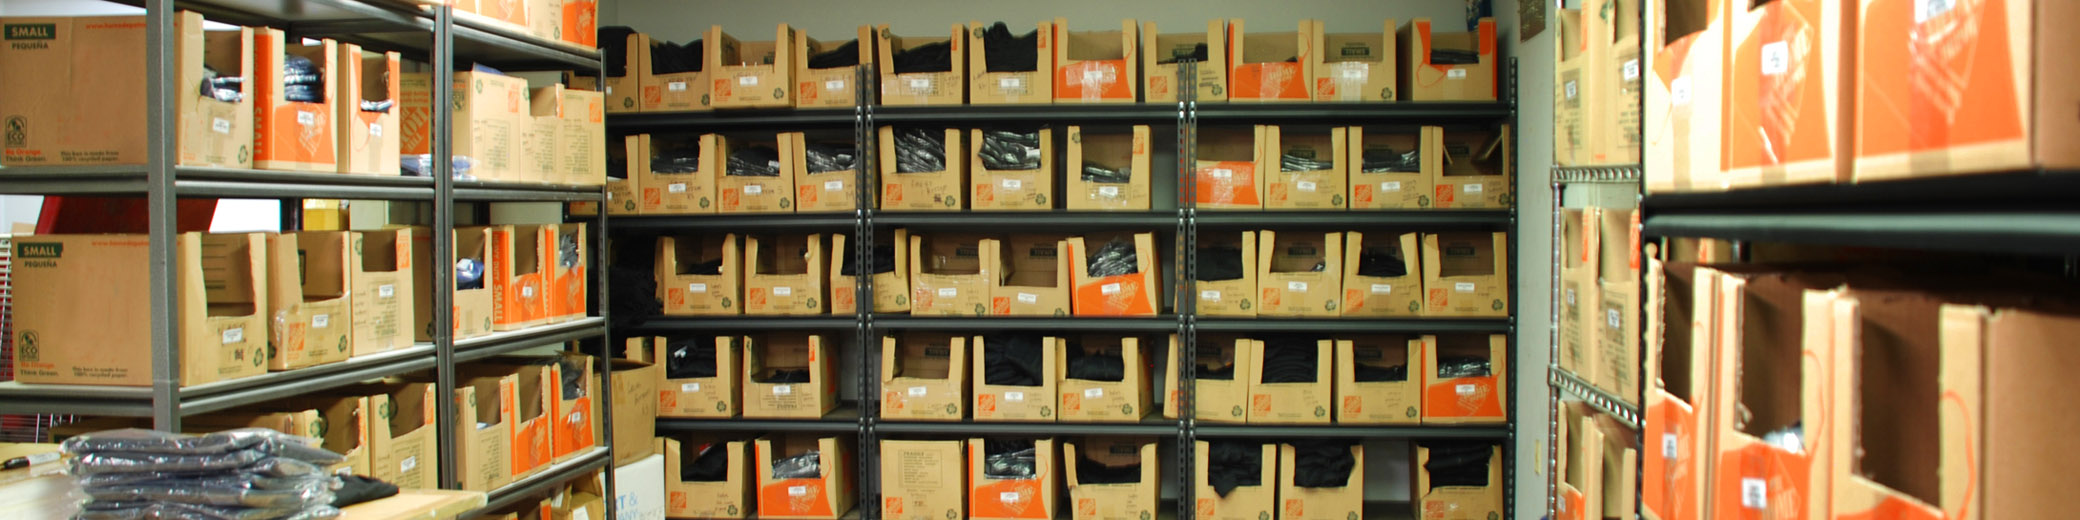 Inventory warehousing for on-demand screen printing or embroidery of apparel at Image Mart.